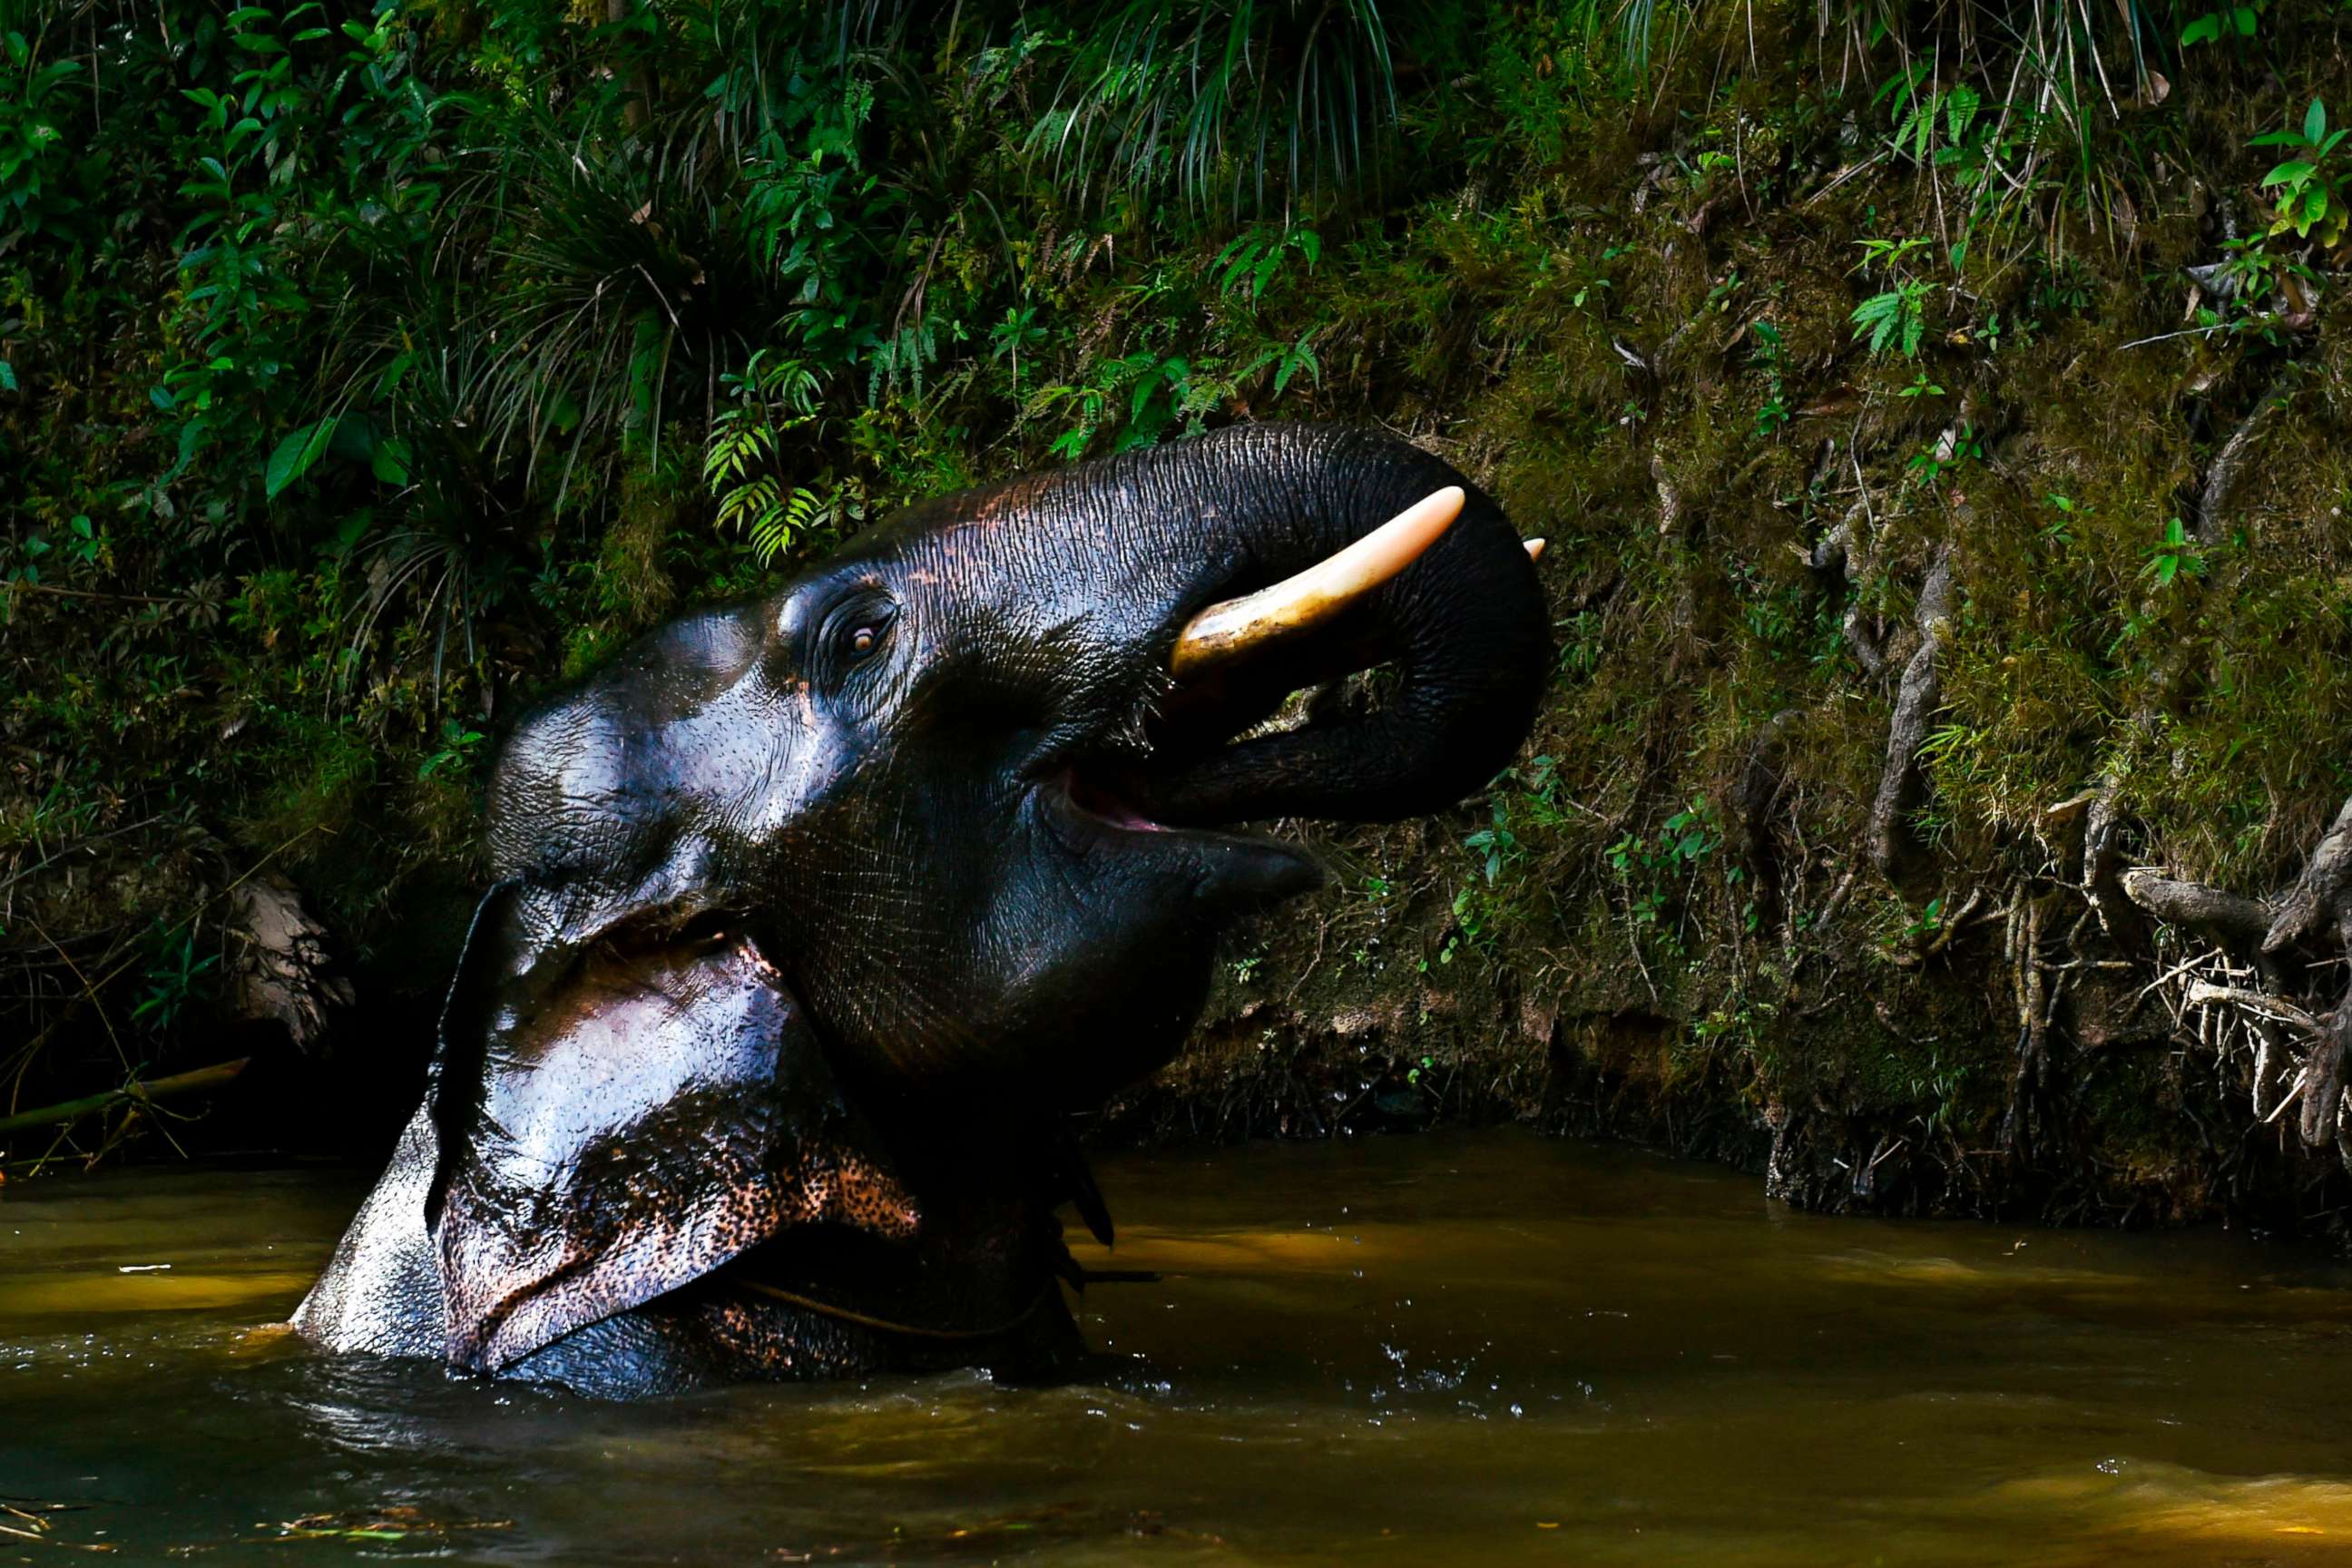 PHOTO: A male Sumatran elephant bathes in a river near the Conservation Response Unit Alue Kuyun in Meulaboh, Indonesia, July 27, 2019.